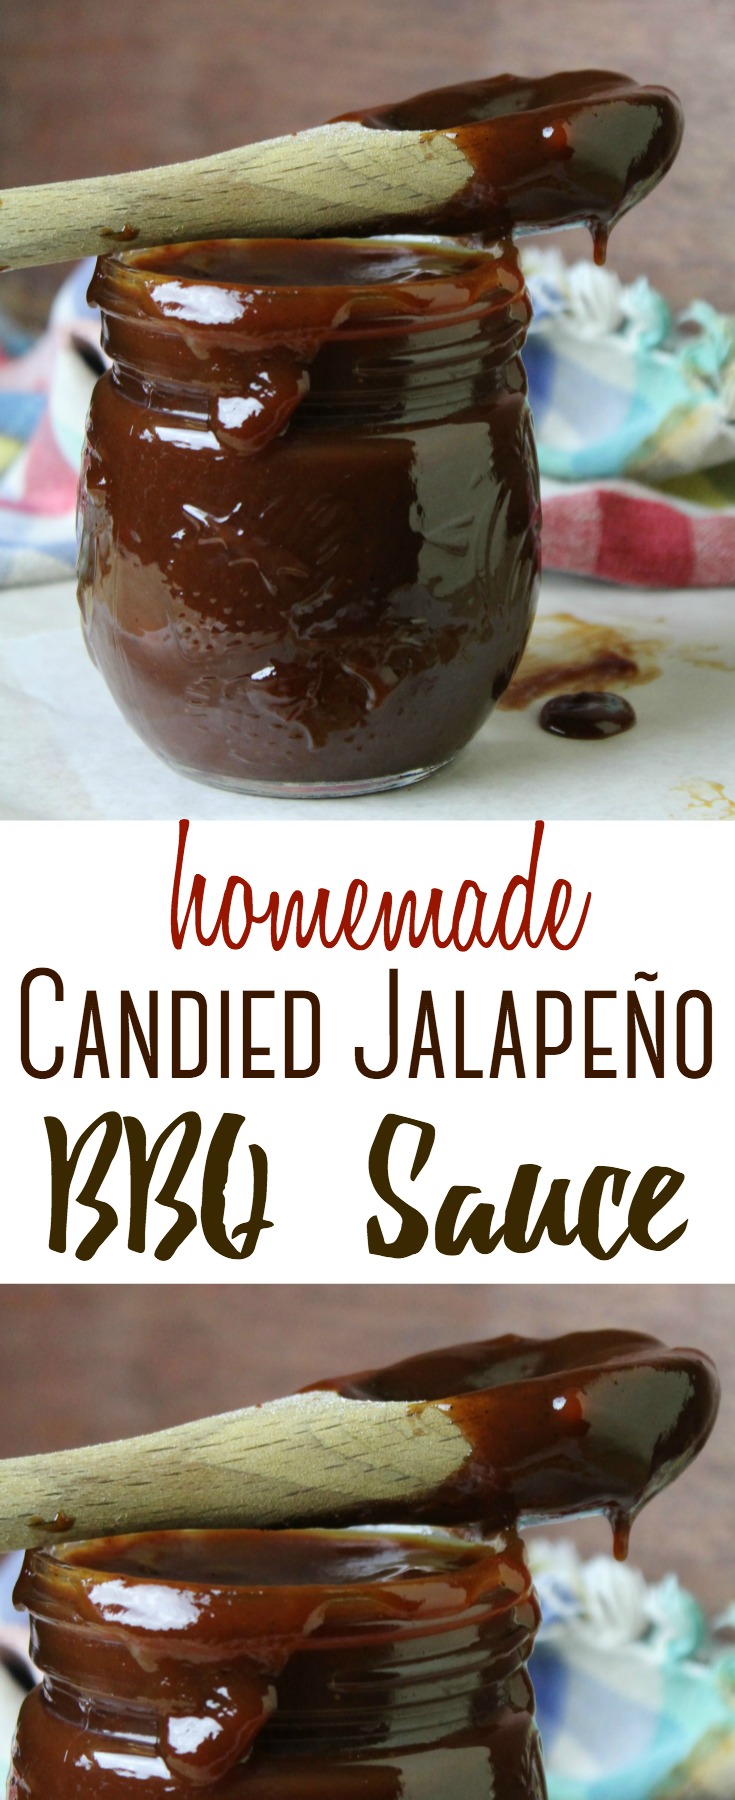 Spice up your backyard cookout with this Candied Jalapeño BBQ Sauce -- full of spicy flavor that's perfect on ribs, burgers or oven baked potatoes!